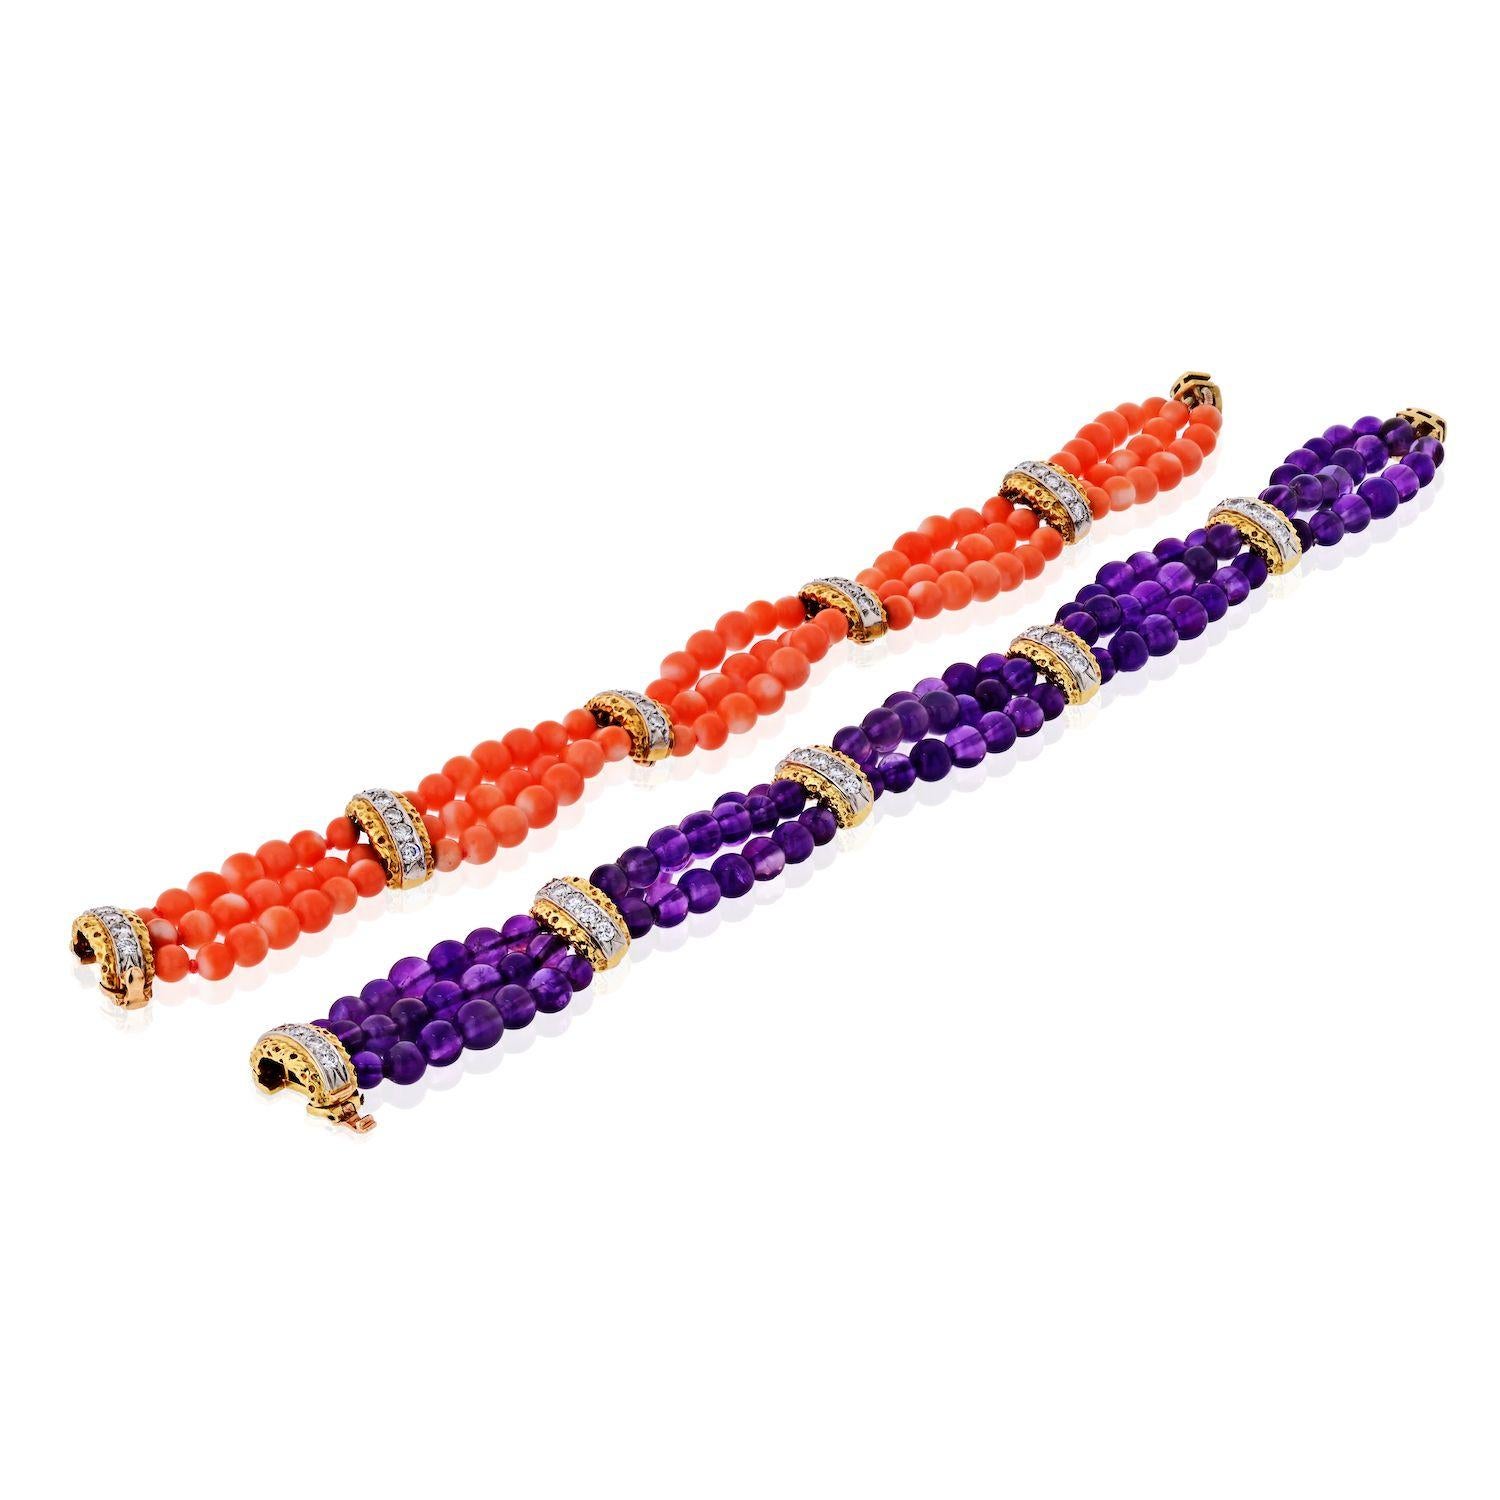 Van Cleef & Arpels 18K Yellow Gold Set Of Three Coral, Chalcedony & Amethyst Bracelets.
Amethyst:
7.7 inches long, 18kt Yellow Gold Diamond and Amethyst bead bracelet it is 0.5in wide. Well matched amethyst beads and sparkling diamonds. There is a